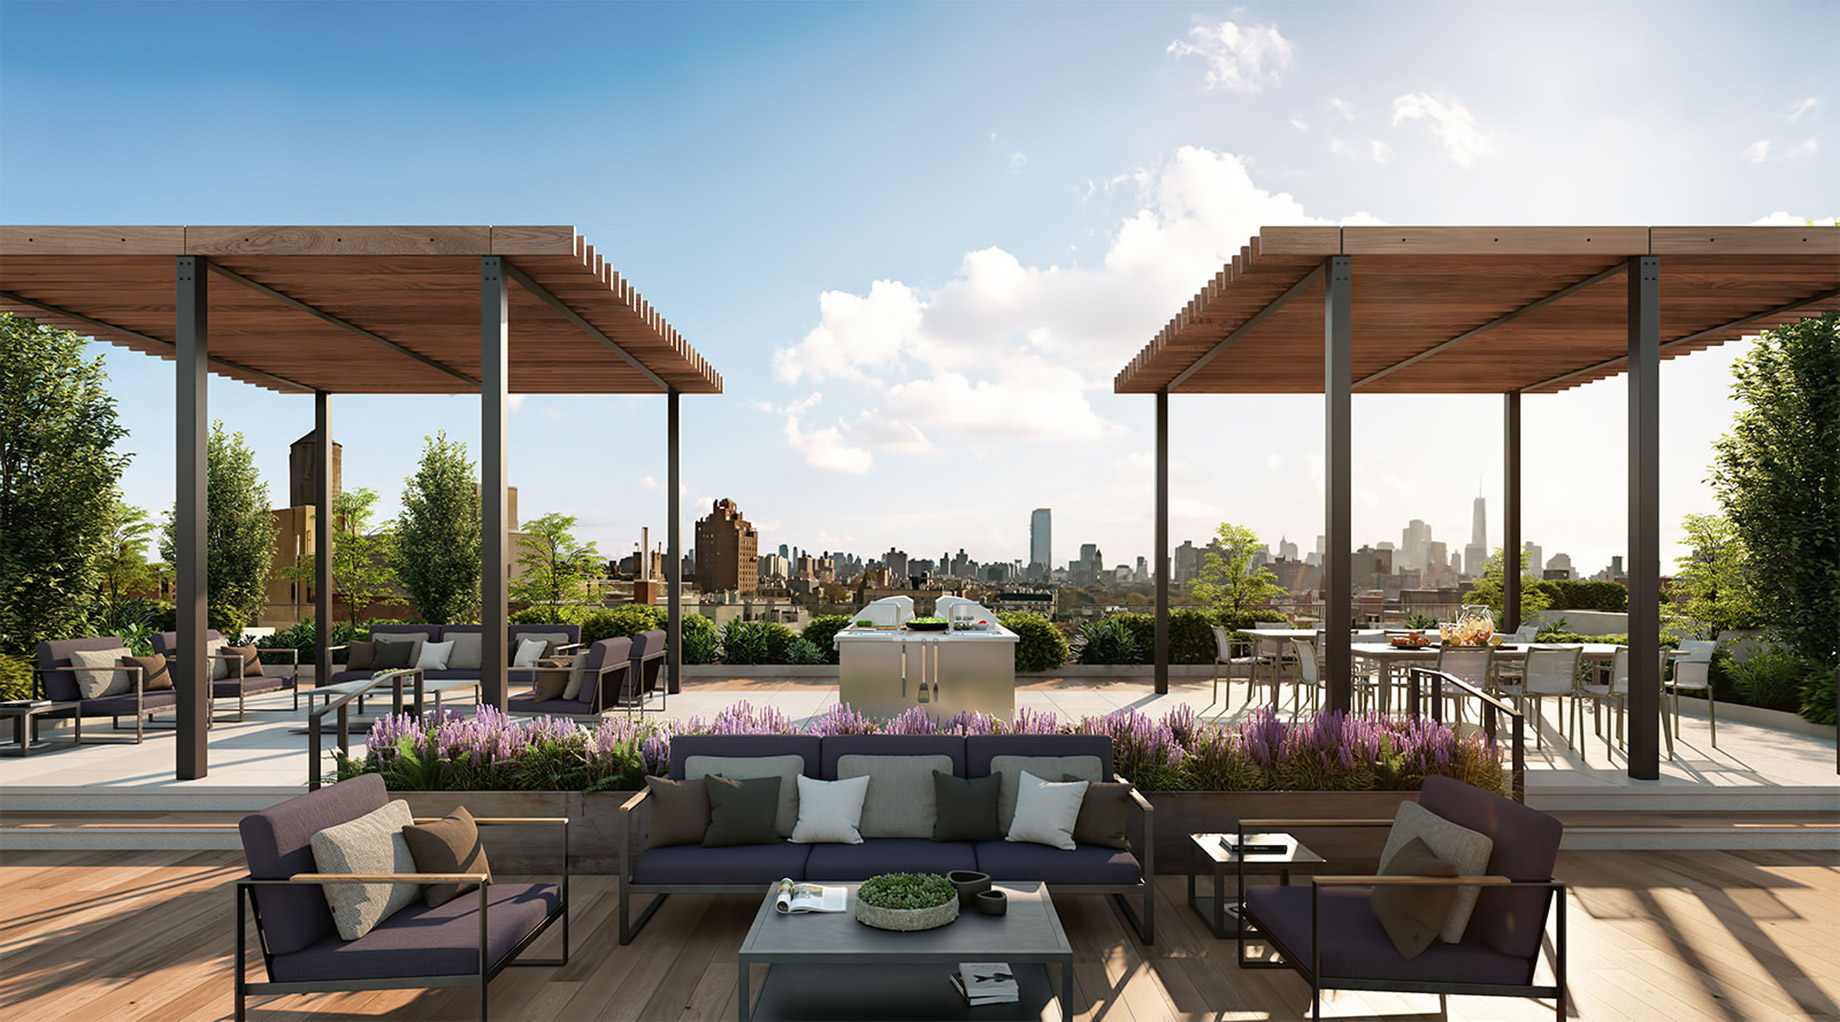 EVGB Rooftop Deck – 510 East 14th St, New York, NY, USA